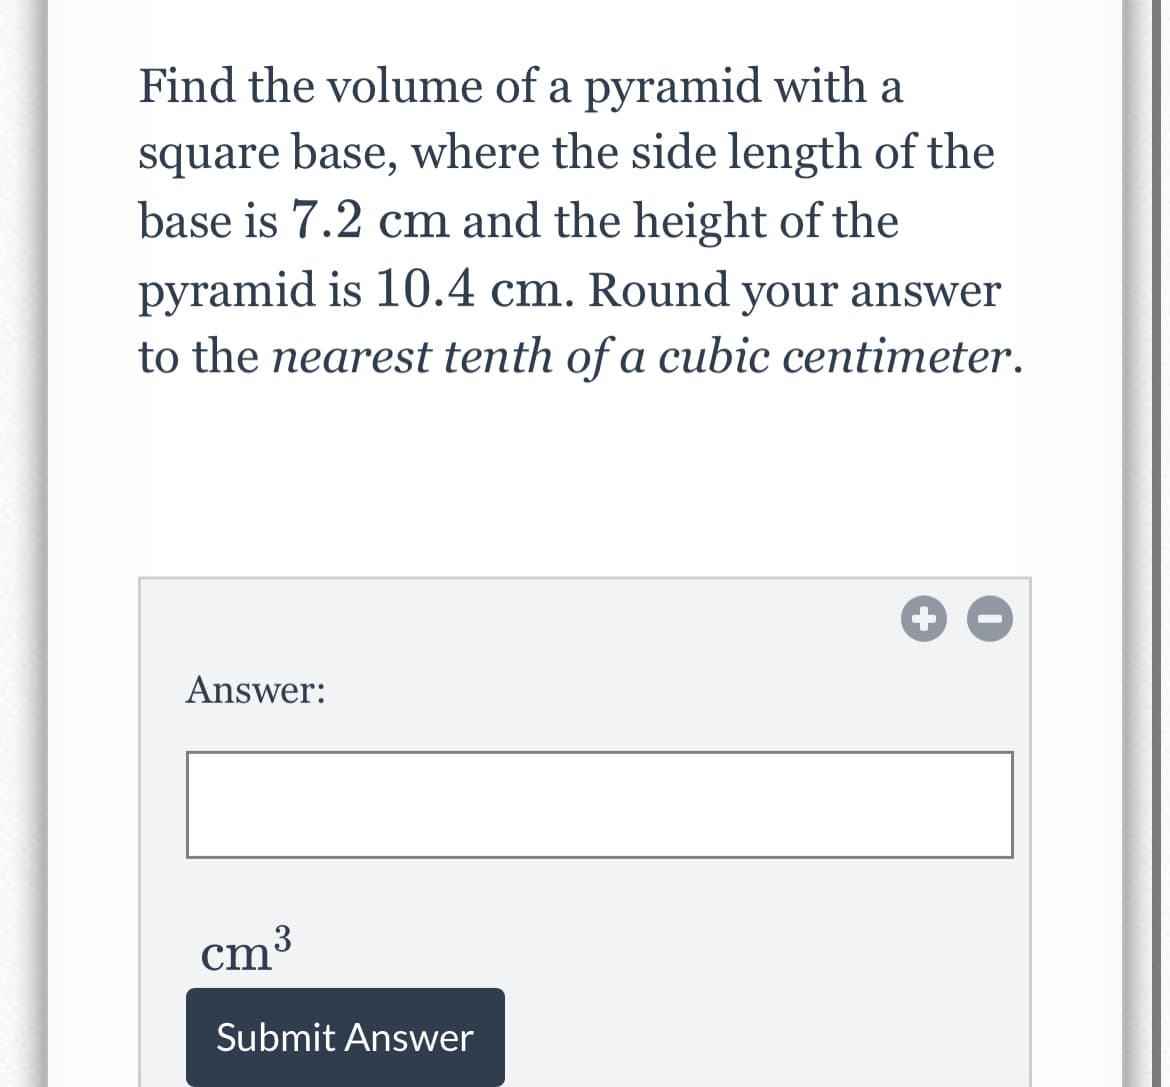 Find the volume of a pyramid with a
square base, where the side length of the
base is 7.2 cm and the height of the
pyramid is 10.4 cm. Round your answer
to the nearest tenth of a cubic centimeter.
Answer:
cm3
Submit Answer
